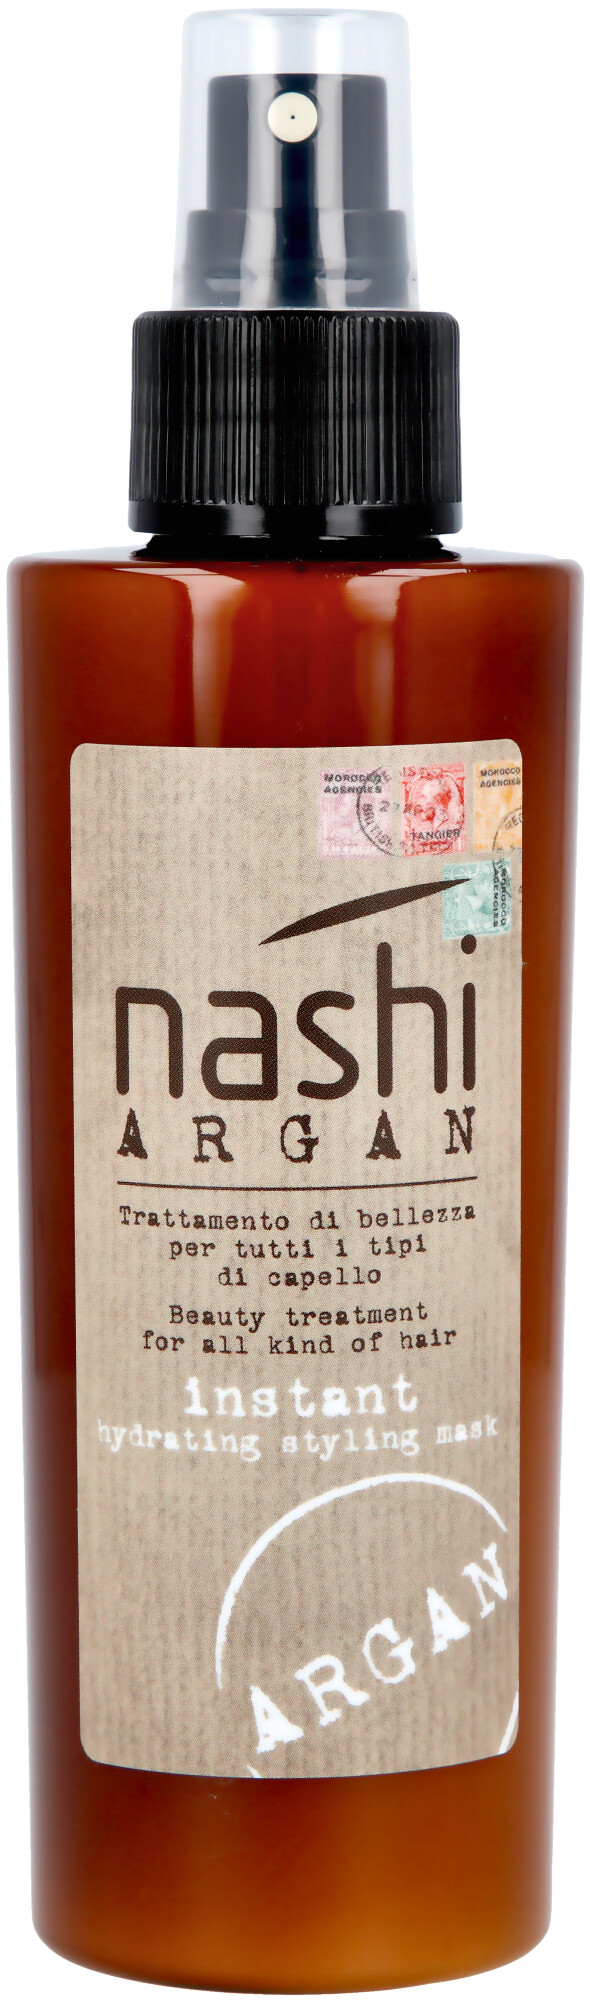 Nashi Argan Lebanon on Instagram: Nashi Argan Instant protects hair from  heat sources such as hairdryers and straighteners! #nashiarganofficial  #nashiargan #nashiarganlebanon #nashi #arganoil #arganshampoo #arganmask  #hairtreatment #madeinitaly🇮🇹